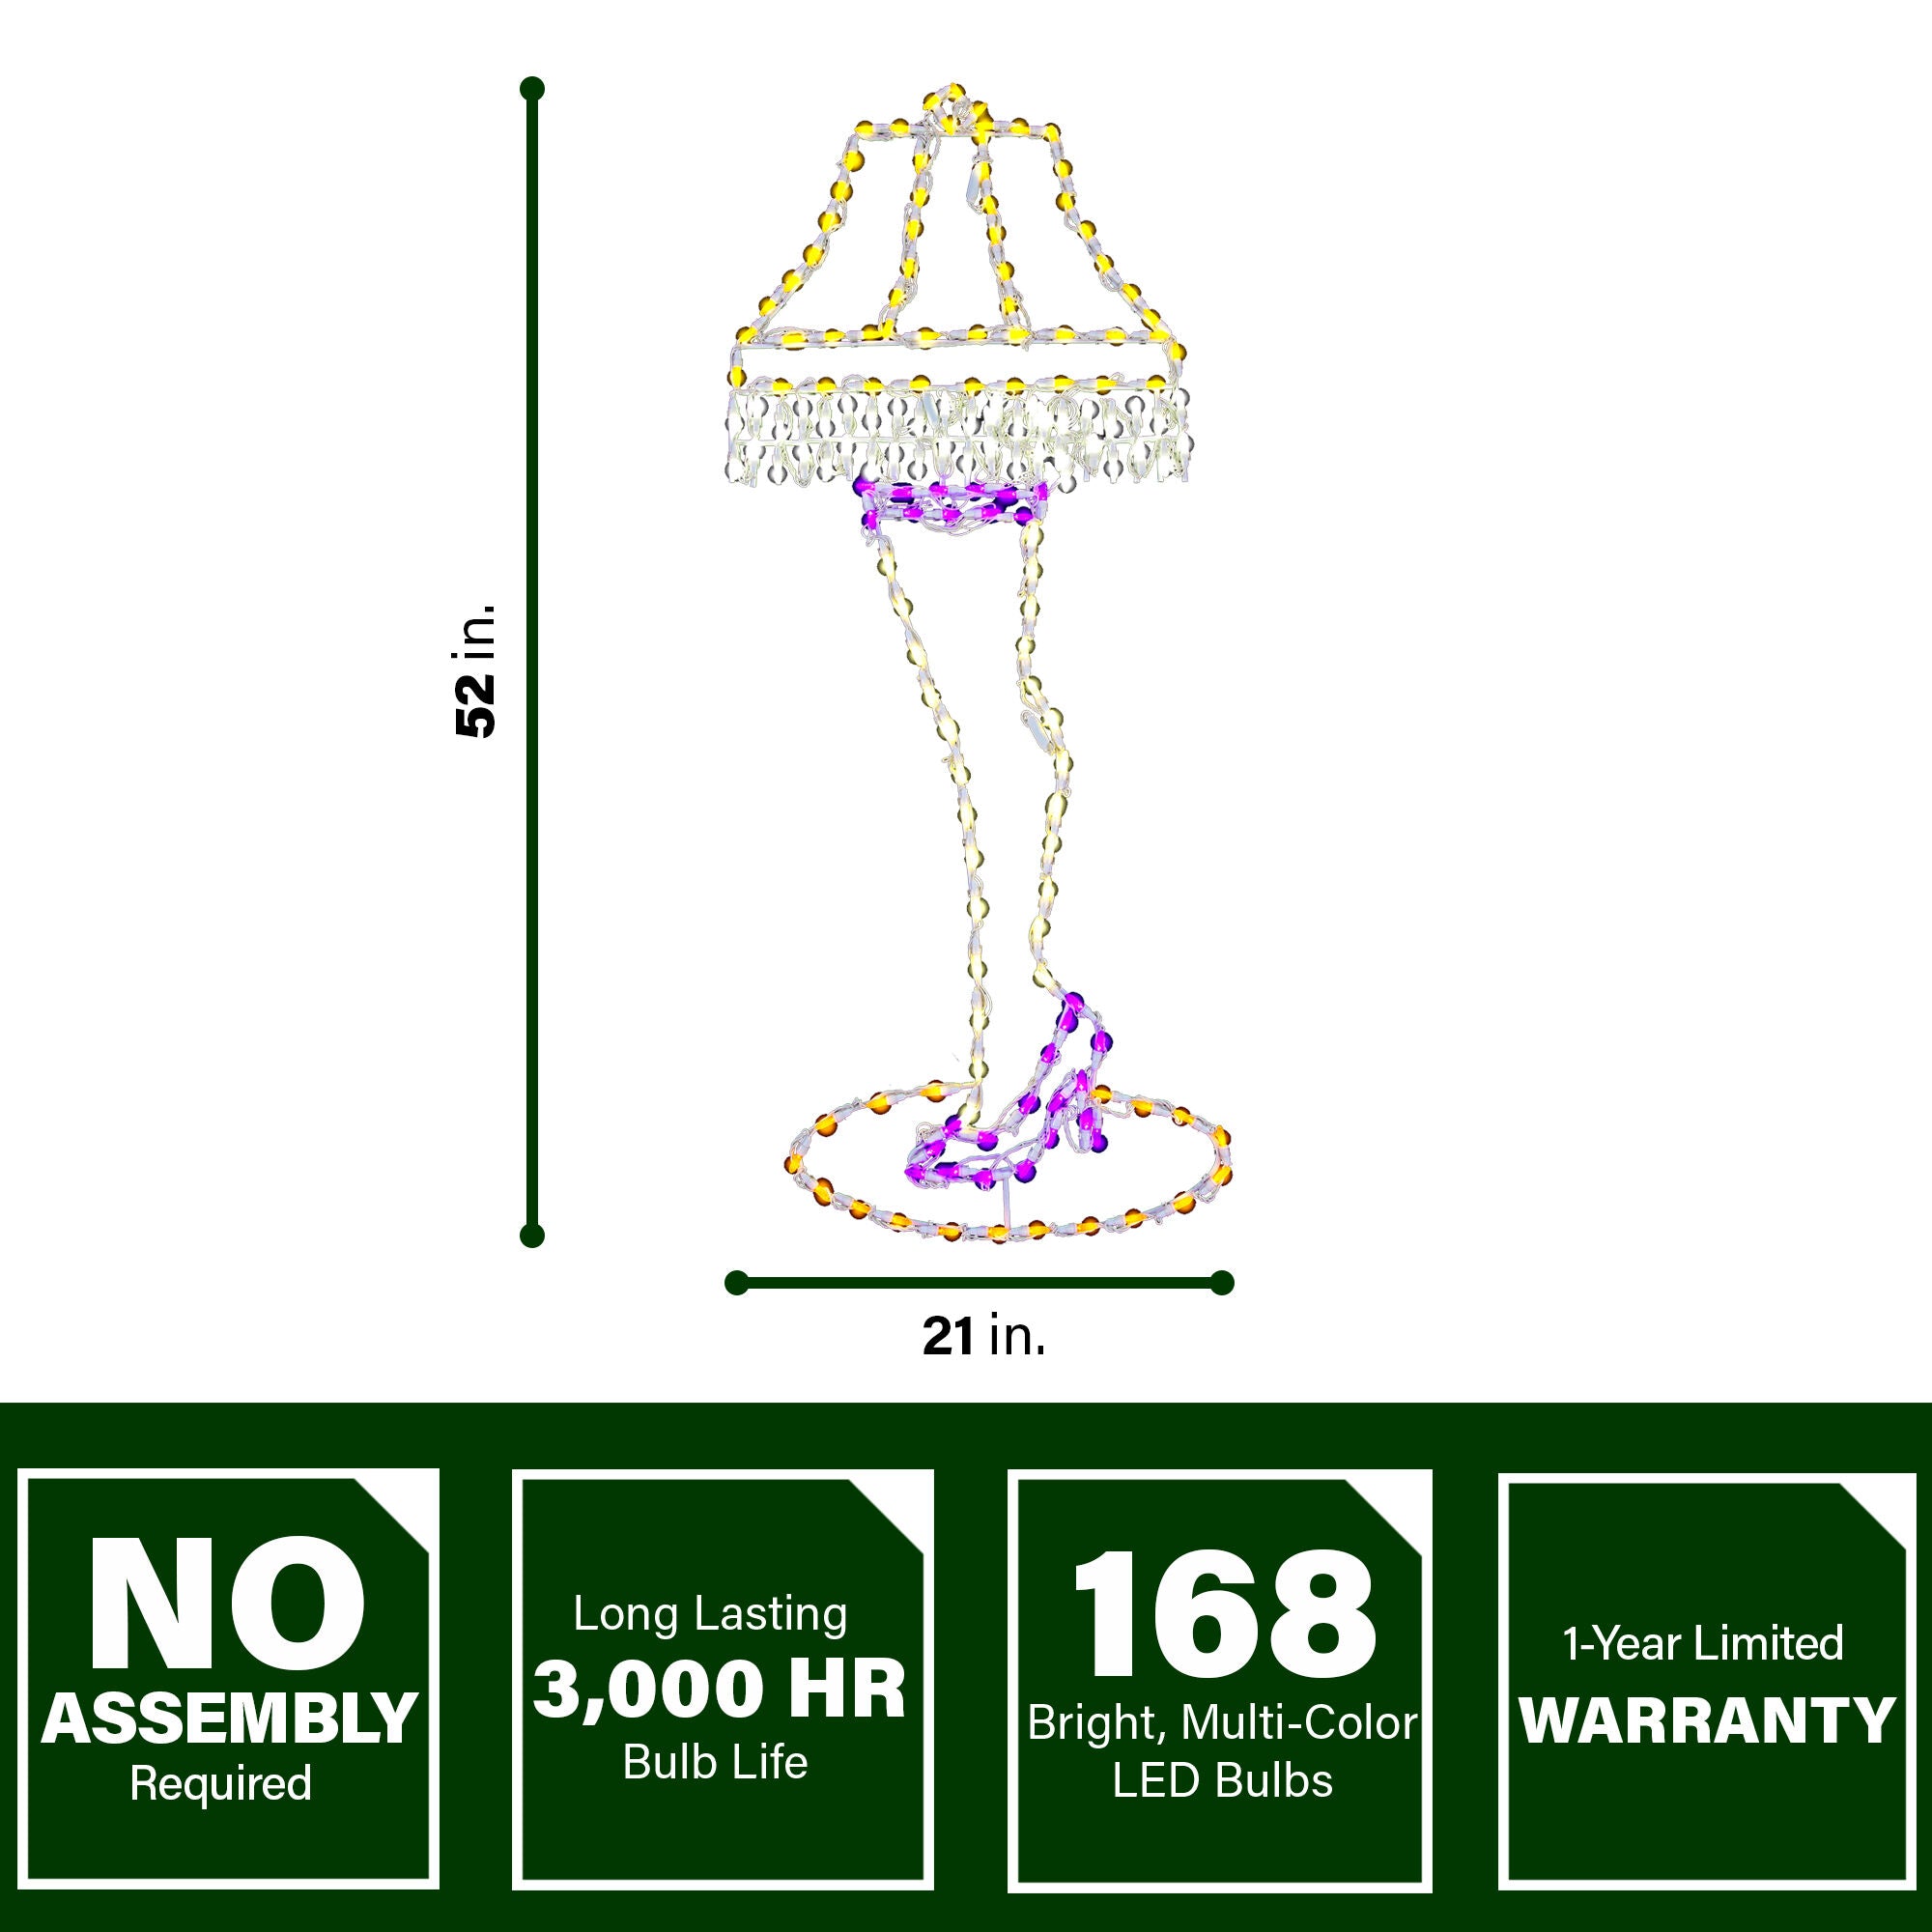 Fraser Hill Farm -  52-inchH x 21-inchW Leg Lamp LED Lights, Large Outdoor Christmas Decoration